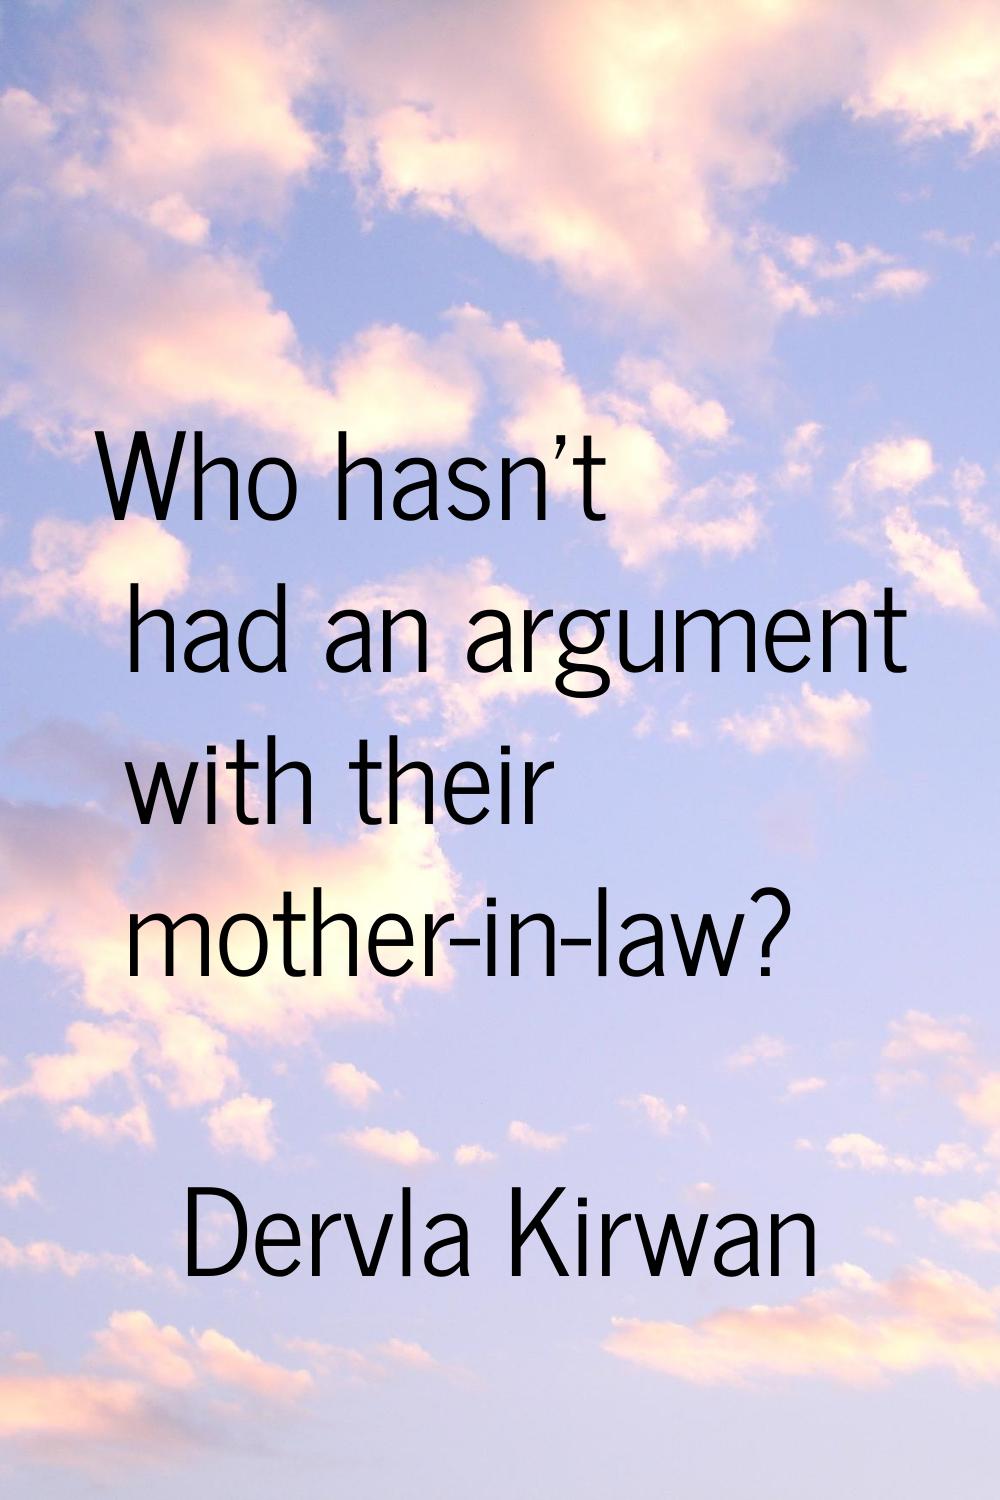 Who hasn't had an argument with their mother-in-law?